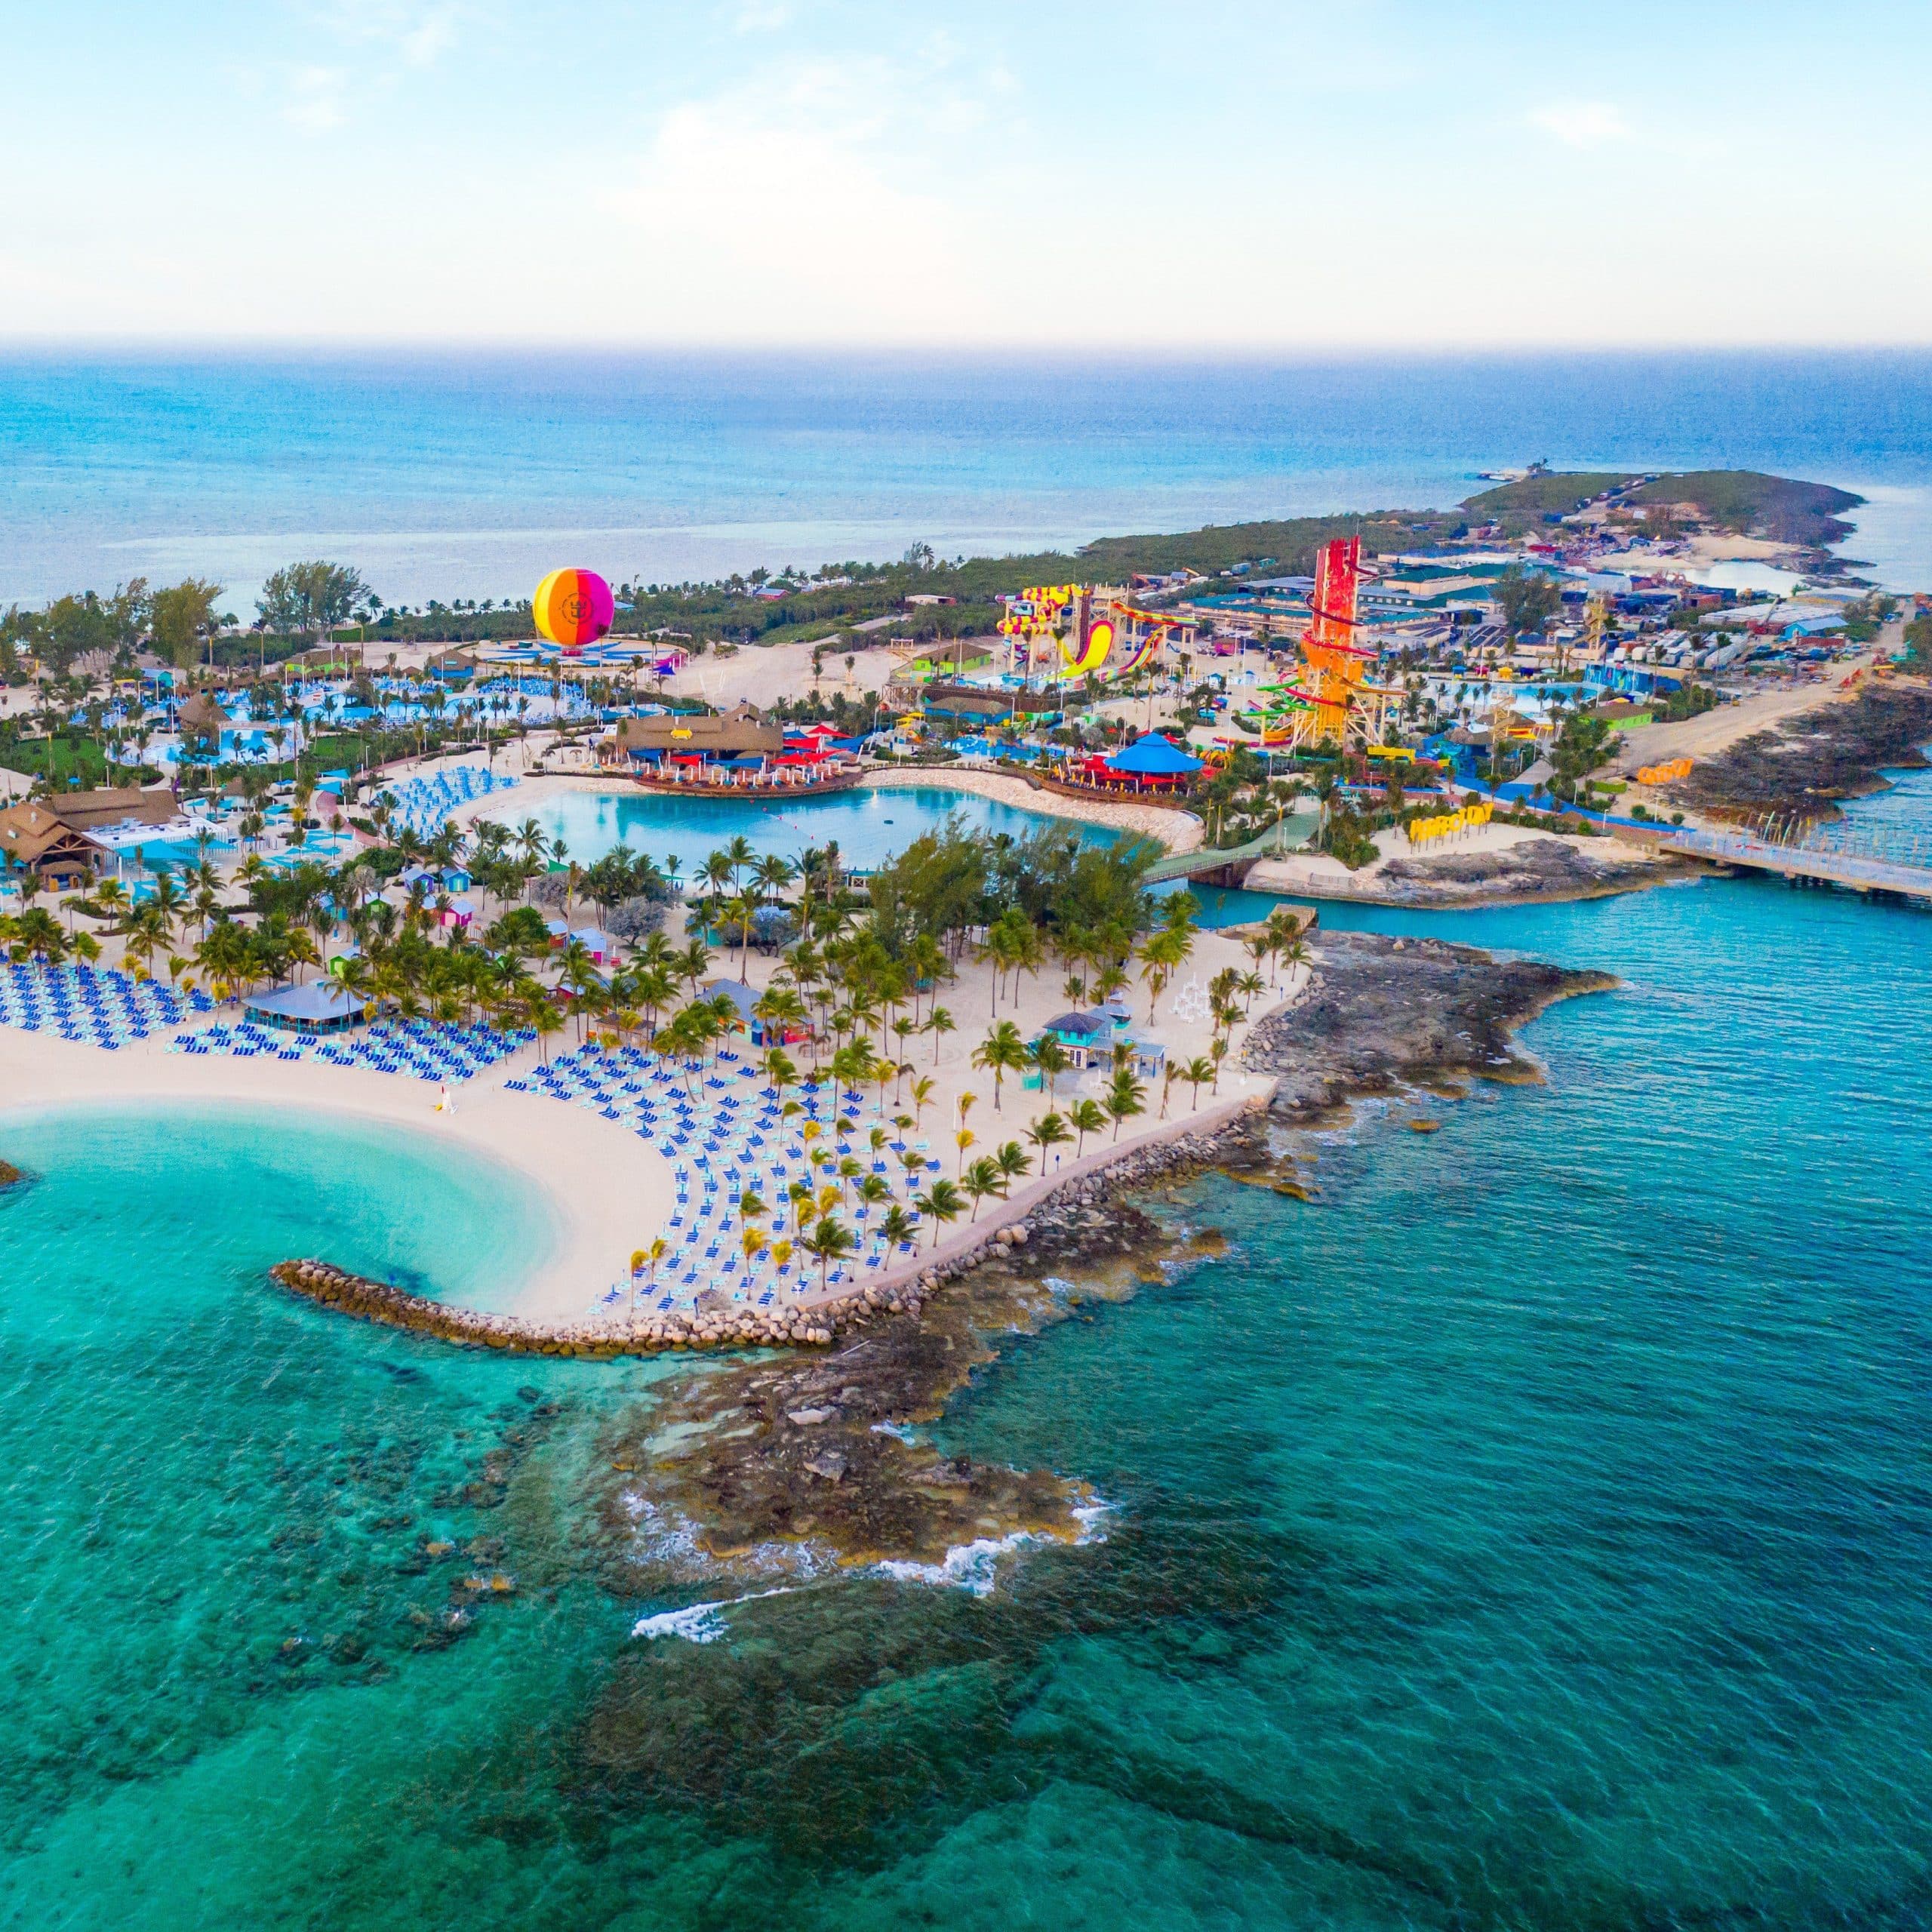 8 Things You Can Do On CocoCay, Royal Caribbeans Island